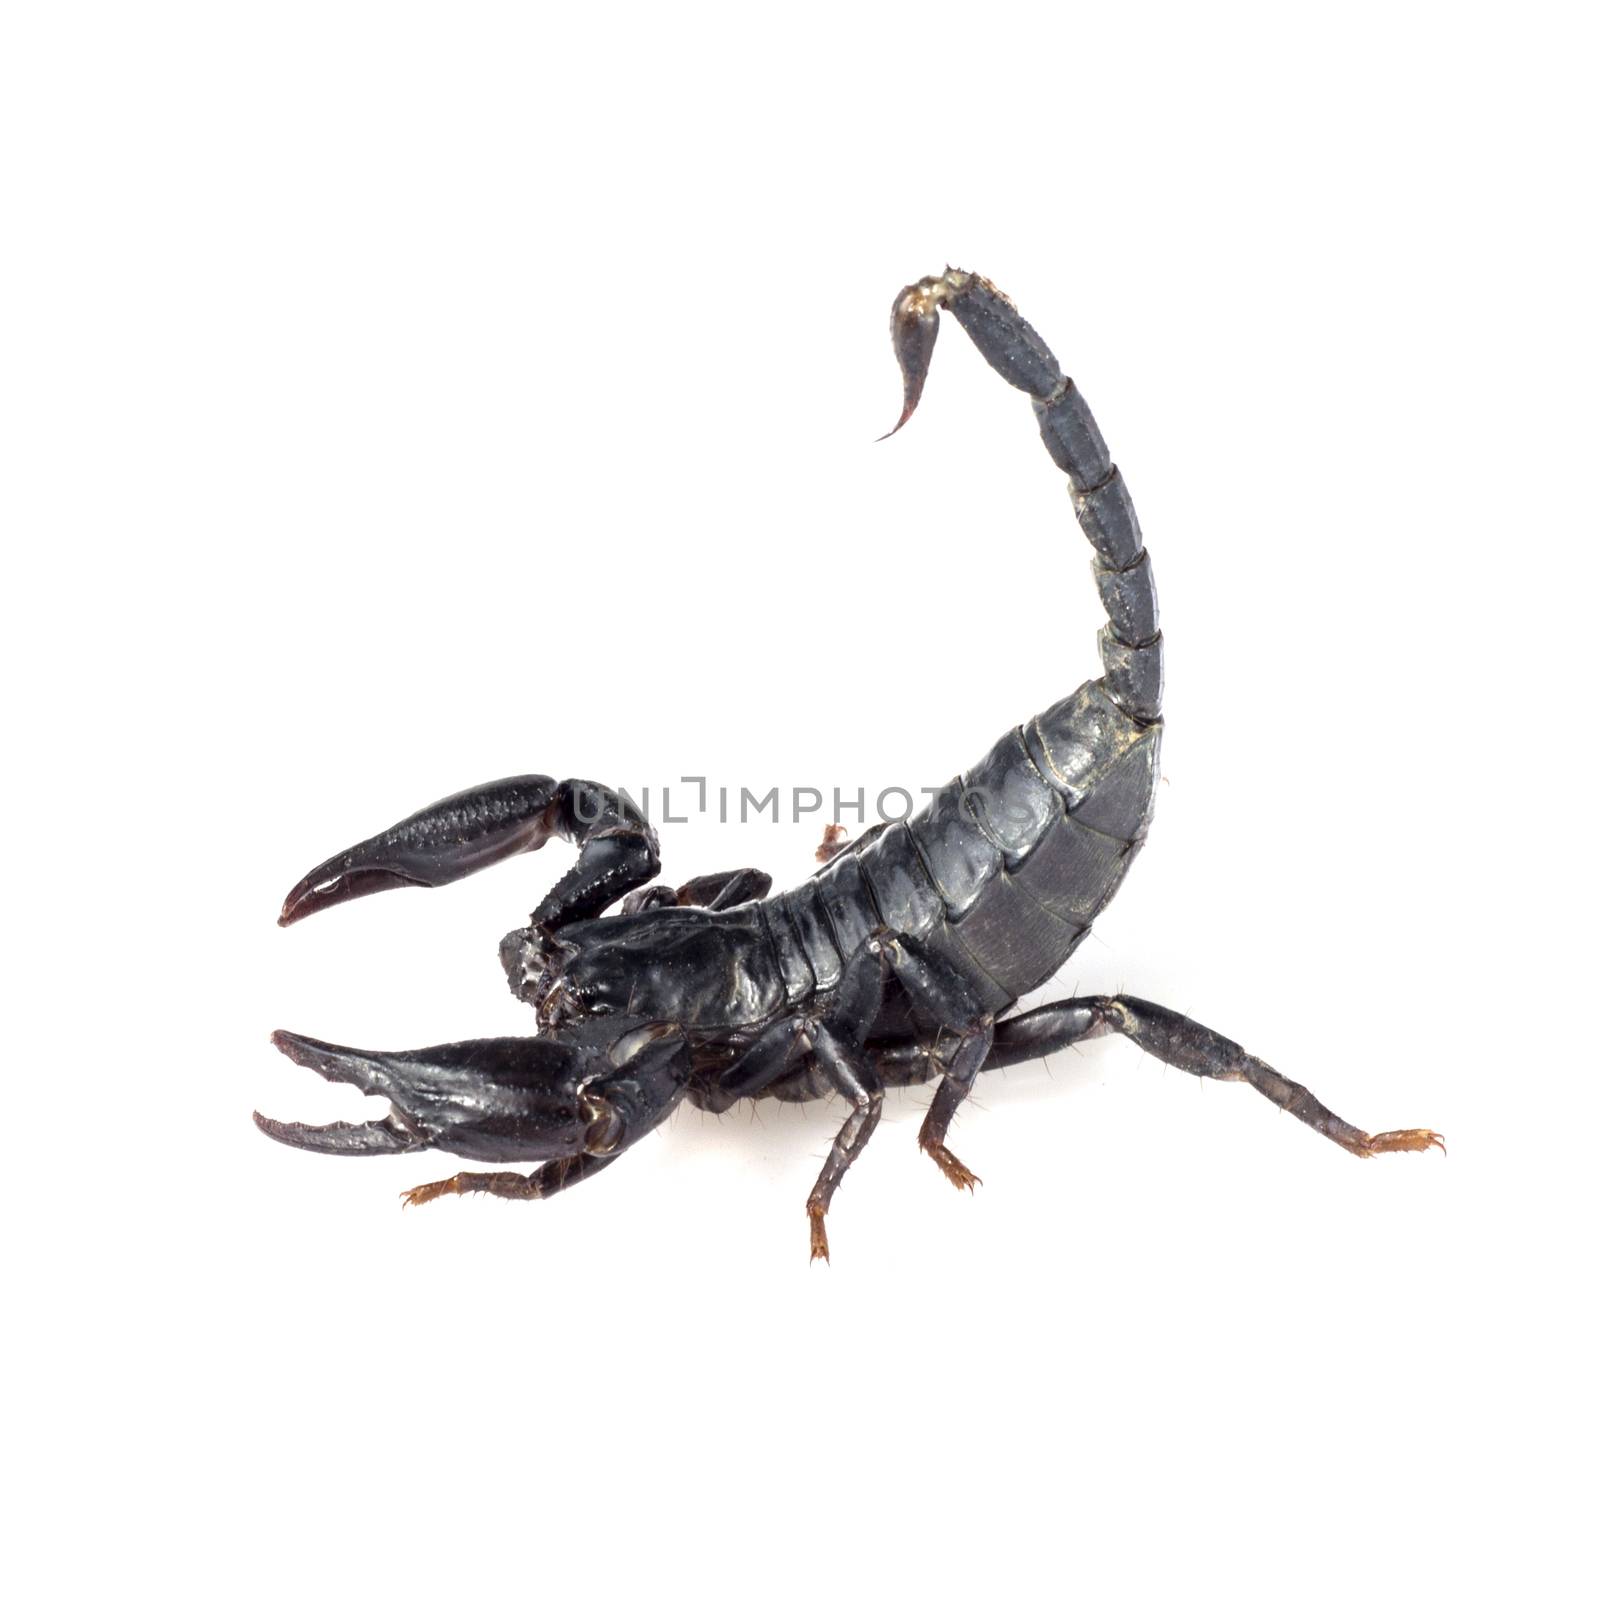 Image of scorpion on a white background. by yod67